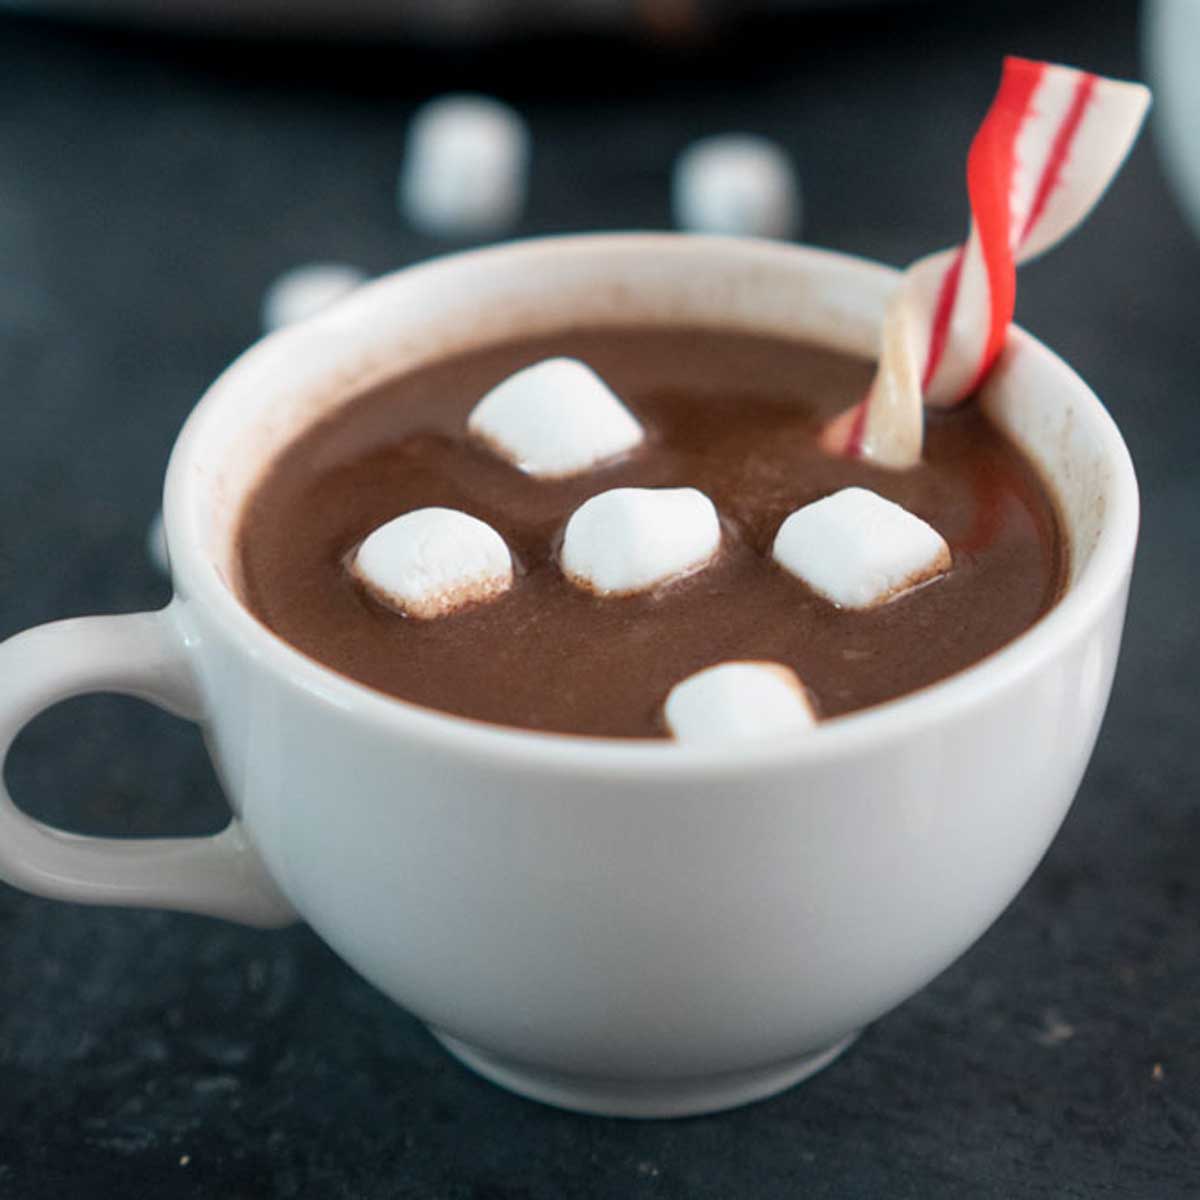 The Cocomotion Hot Chocolate Maker Brews the Perfect Cup